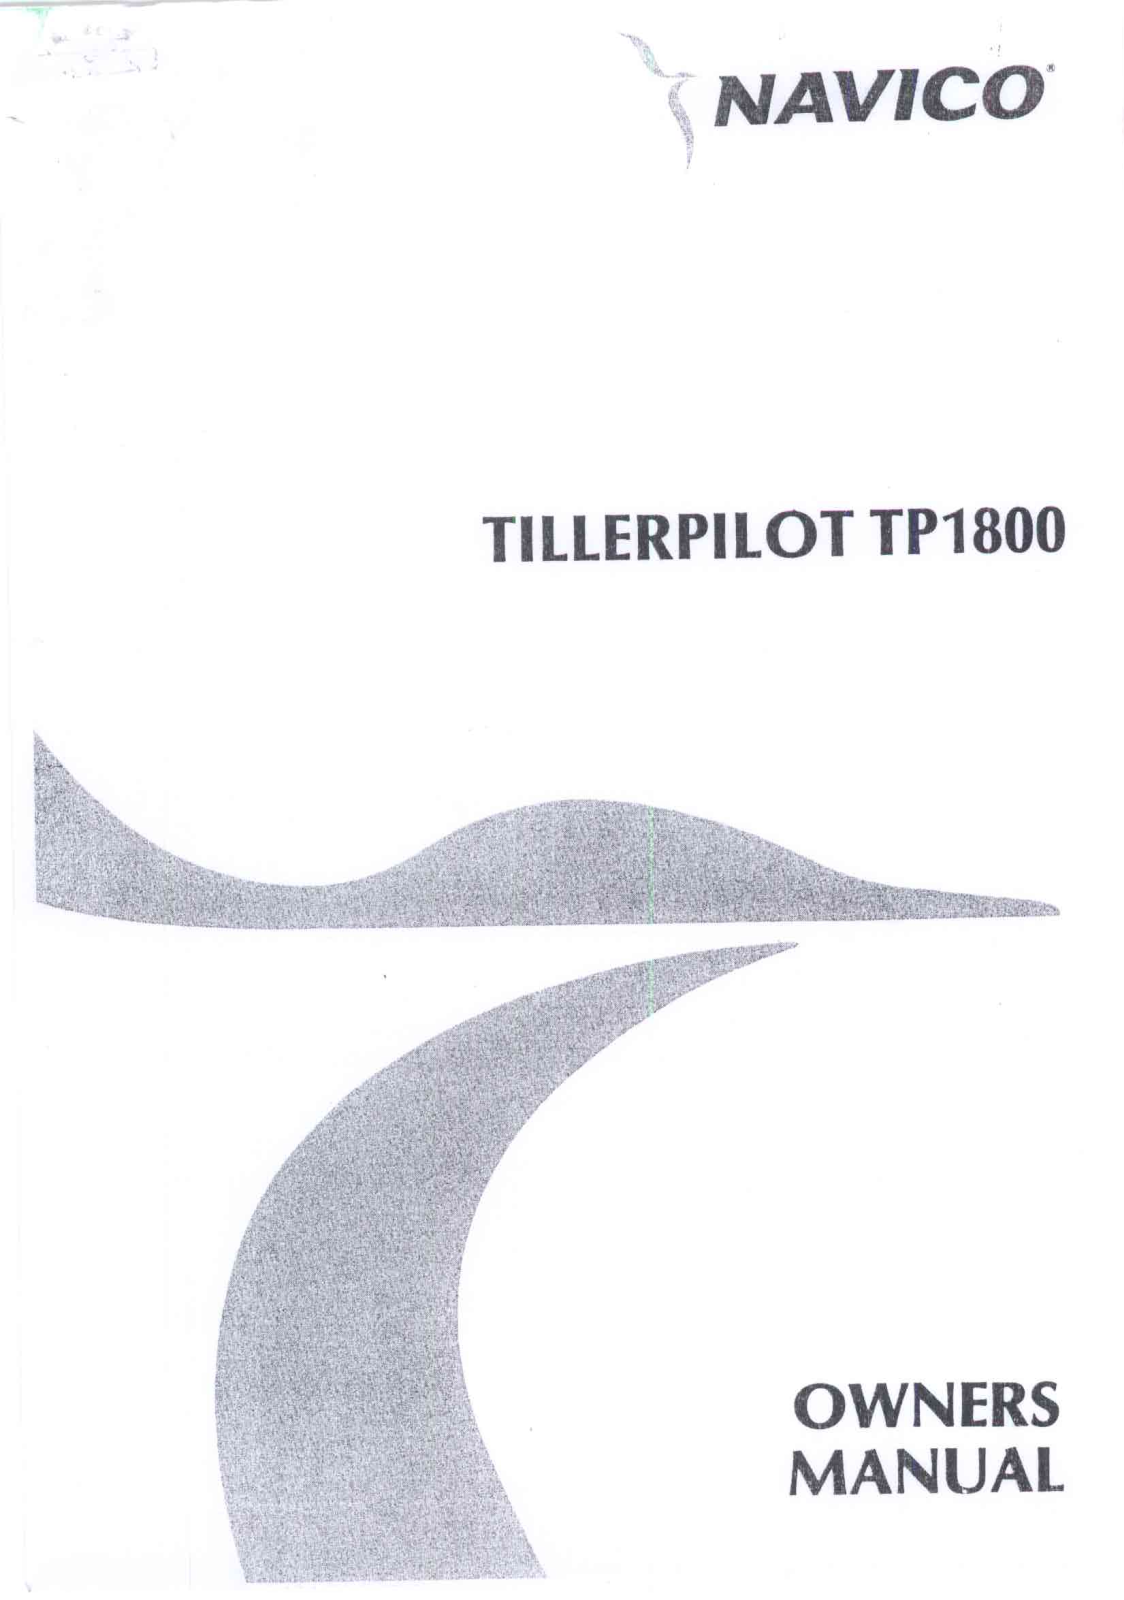 Navico TP1800 owners Manual